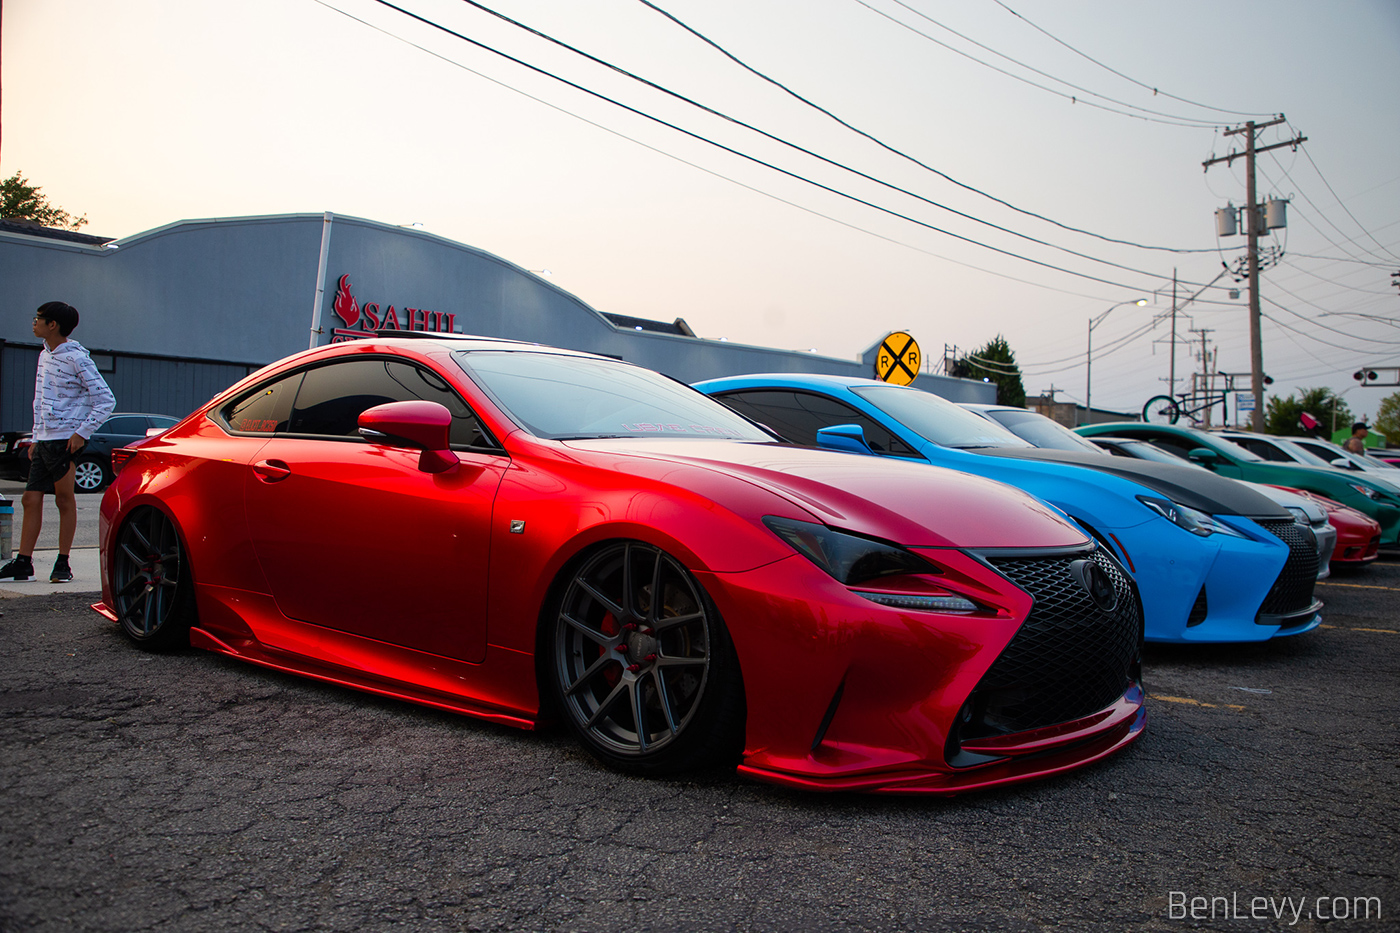 Lexus Coupe with Red Wrap